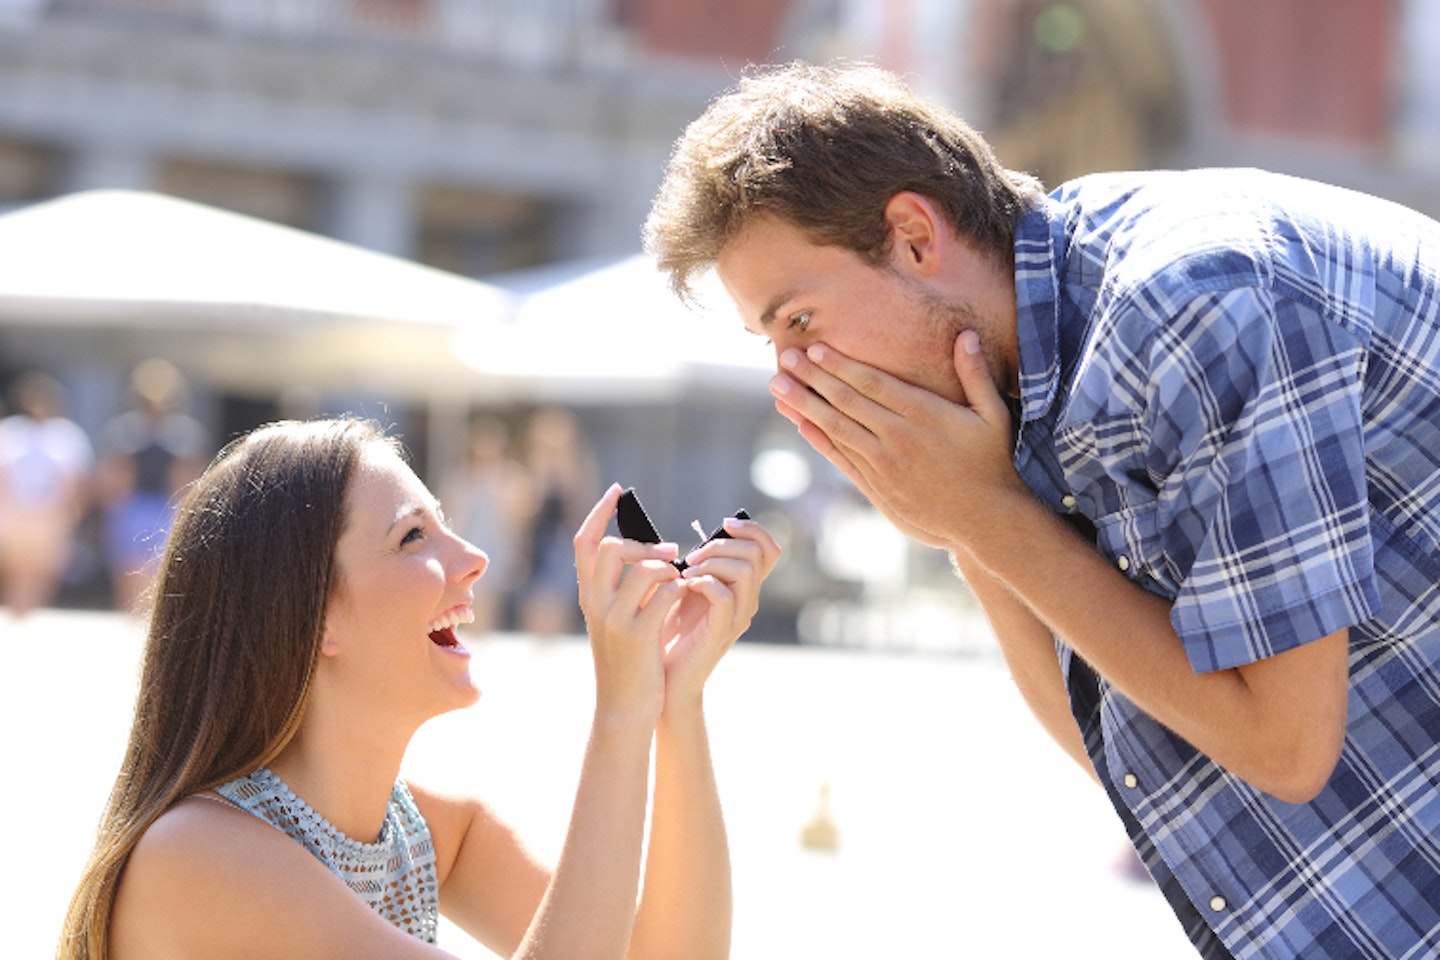 Should women really only be allowed to propose on a Leap Year?